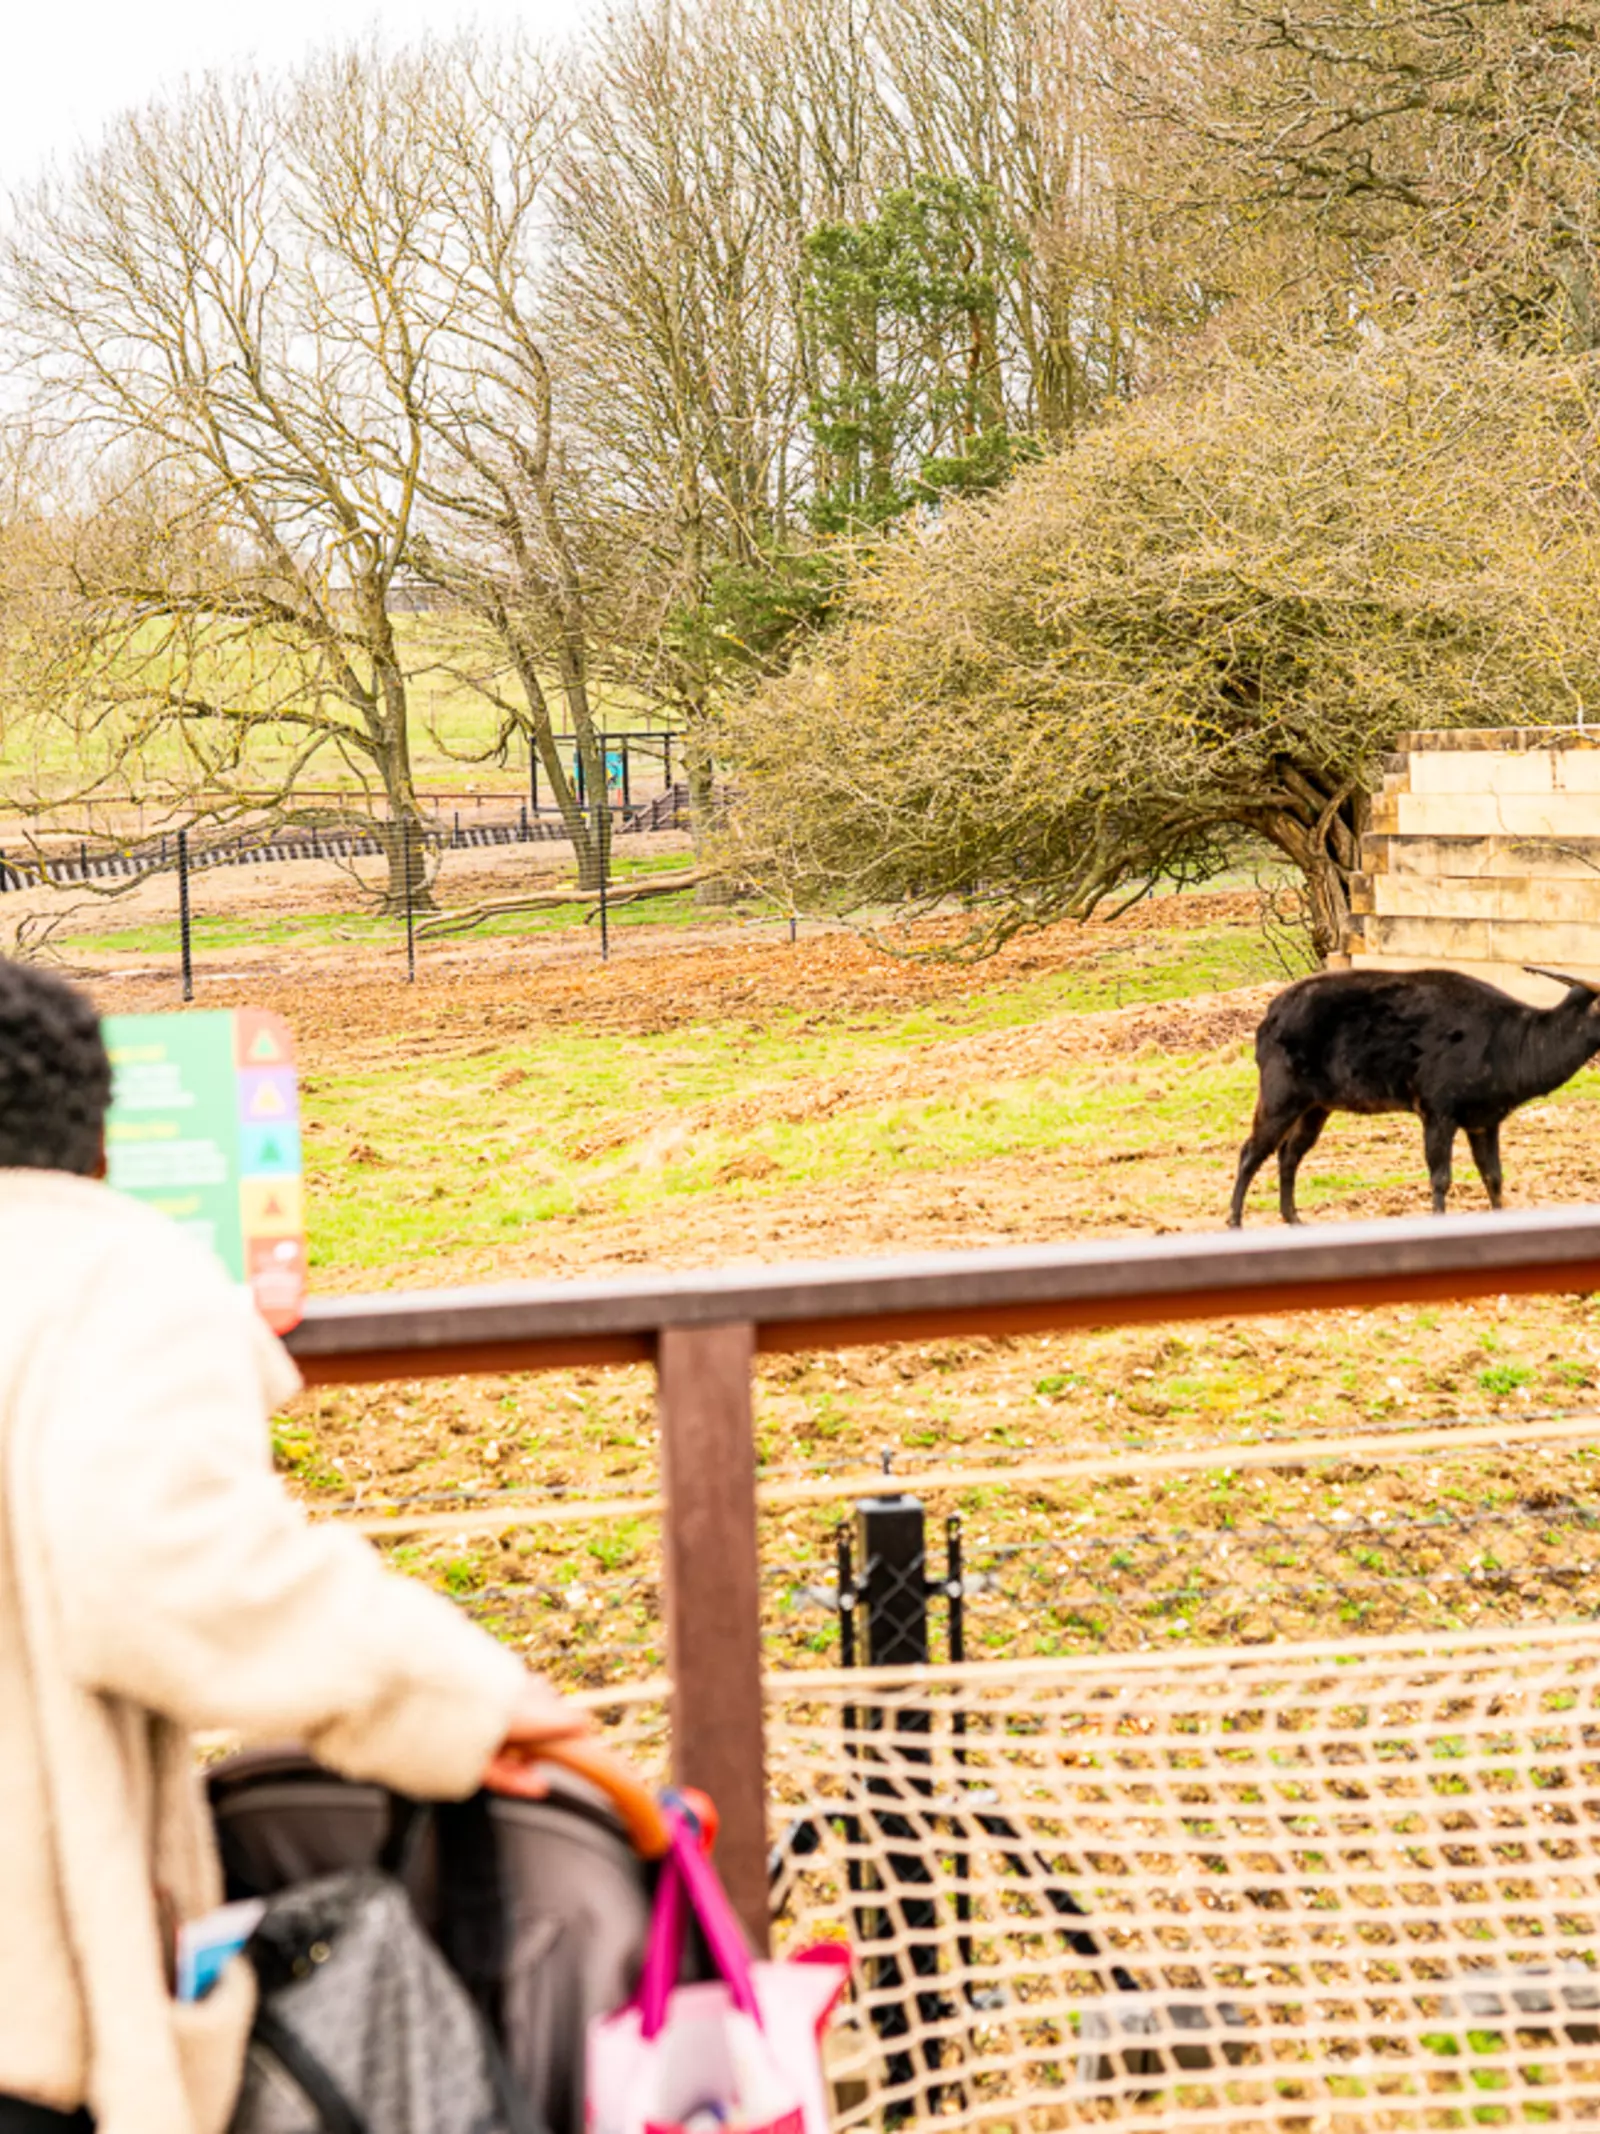 Anoa at Monkey Forest - family watching